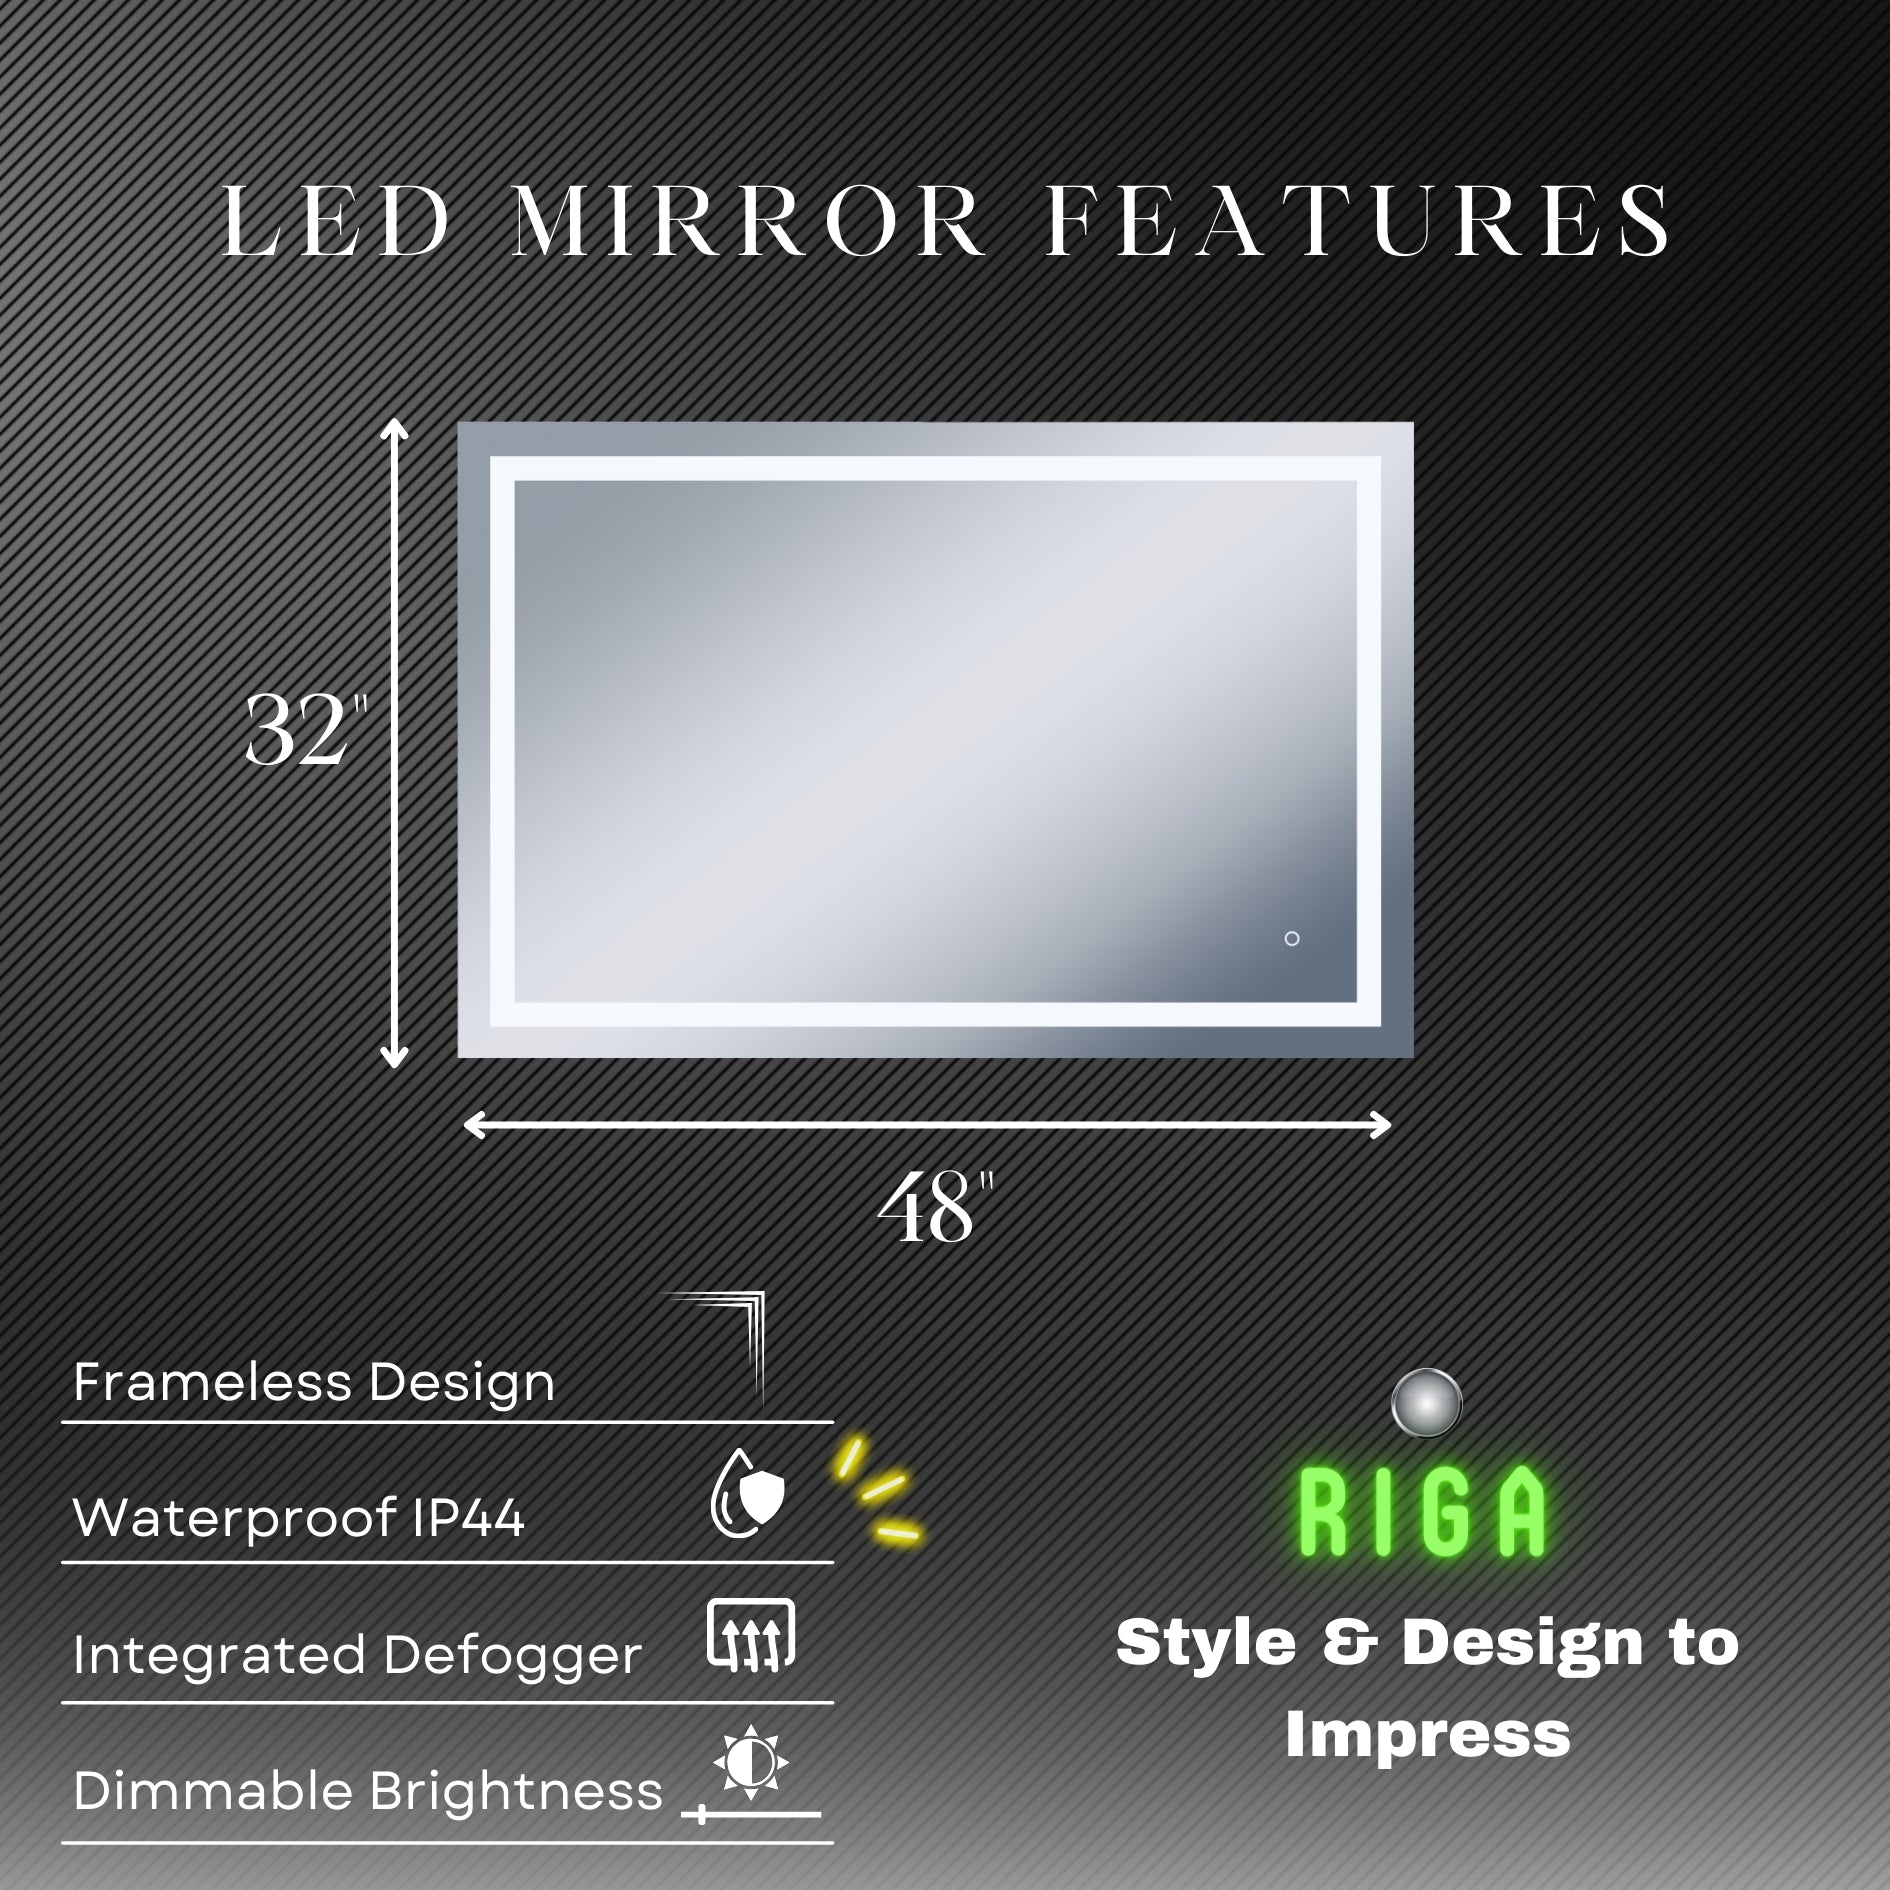 Riga LED Mirror w/ Dimmer & Defogger - Available in 4 Sizes - Dreamwerks